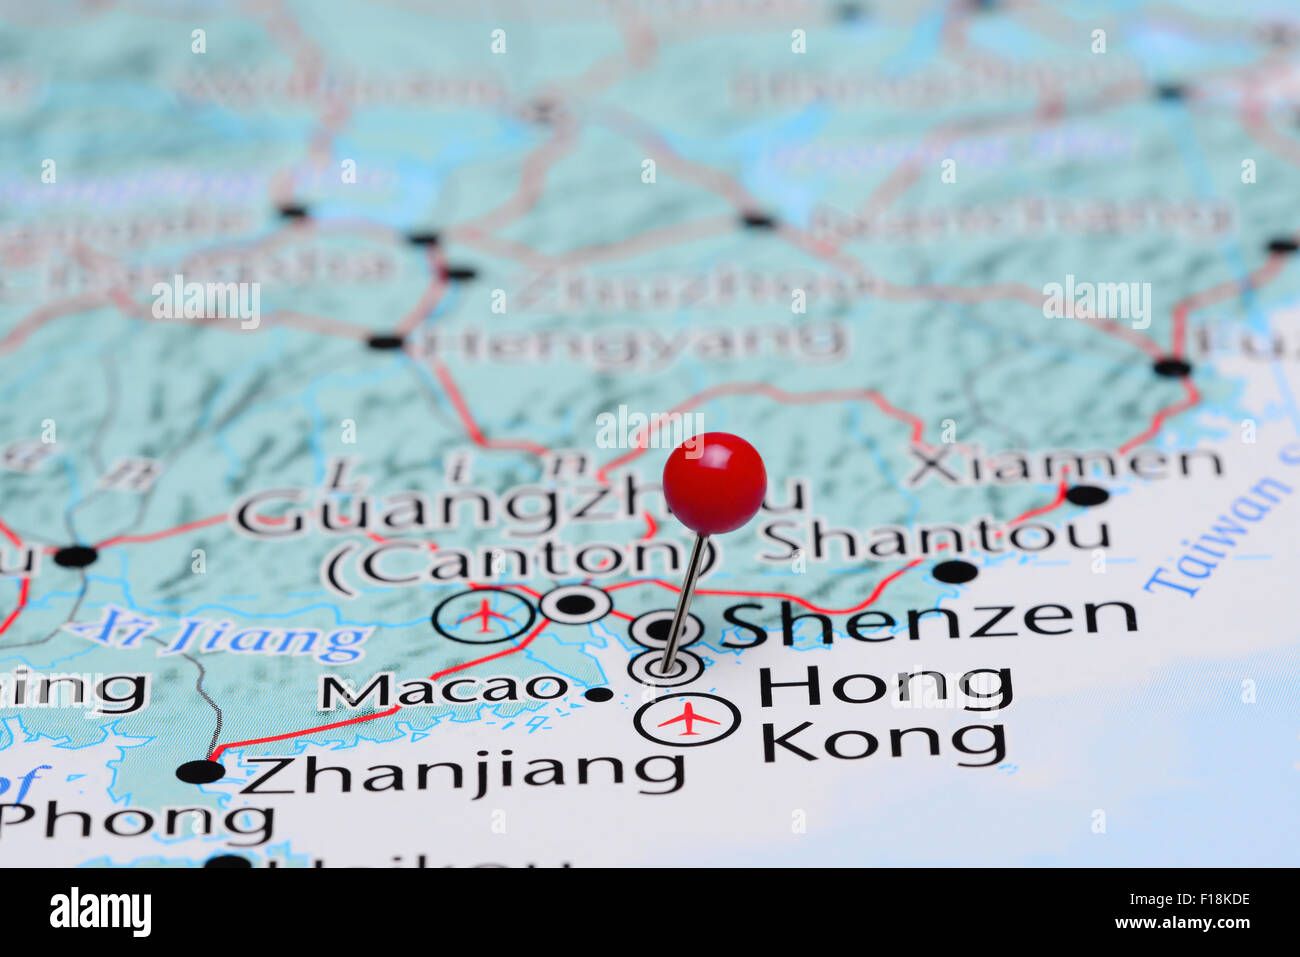 Hong Kong pinned on a map of Asia Stock Photo